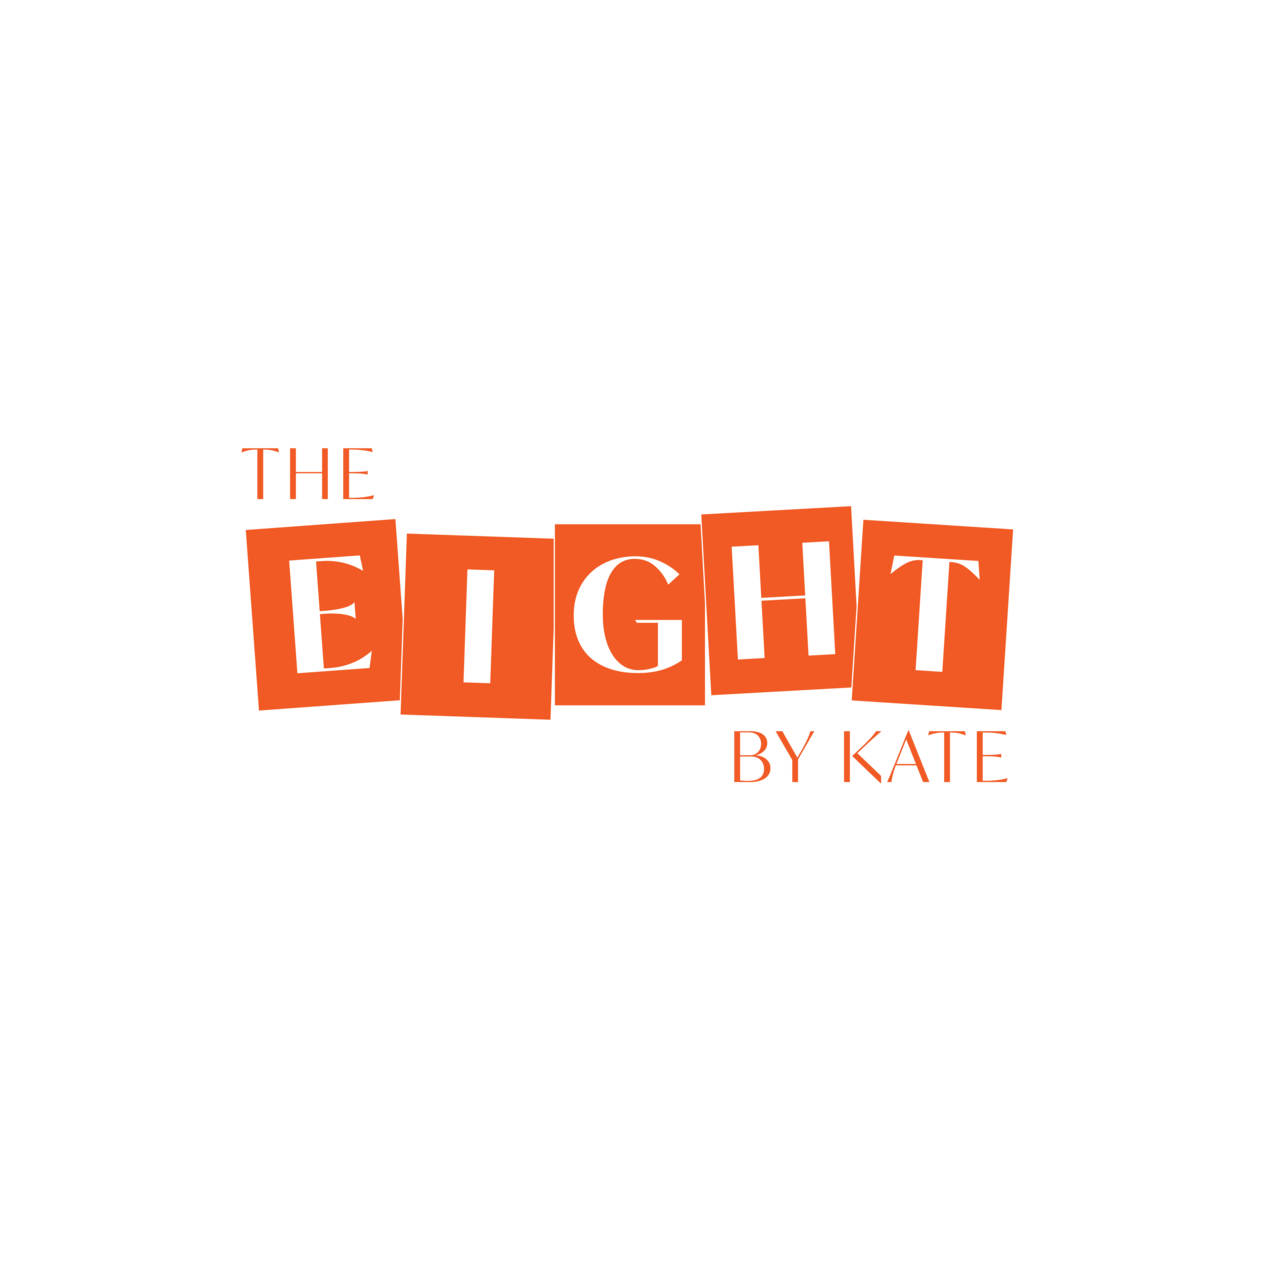 Artwork for The Eight by Kate